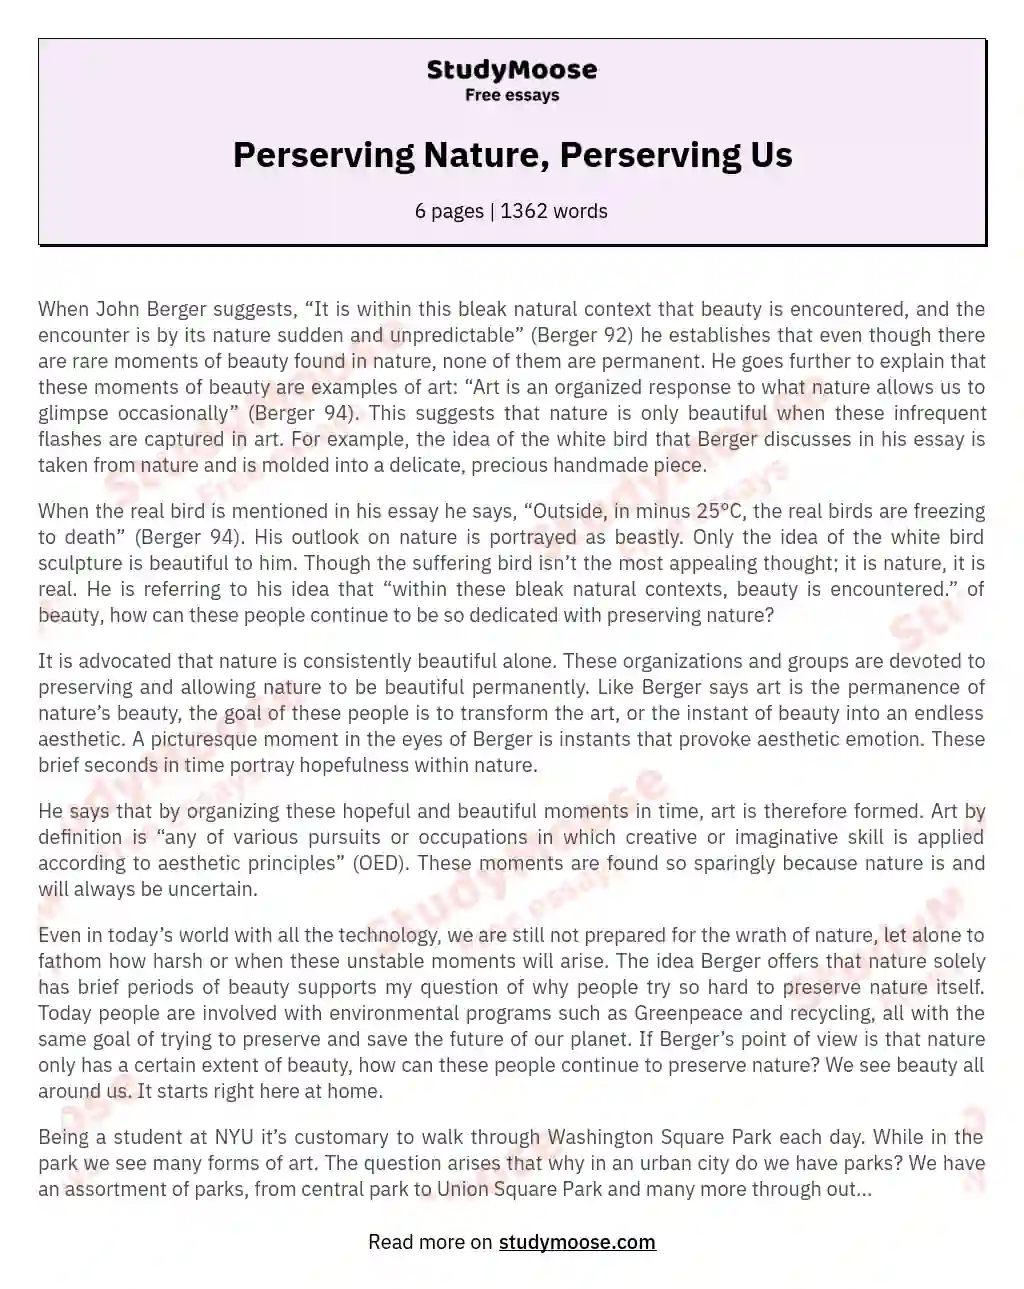 Perserving Nature, Perserving Us essay